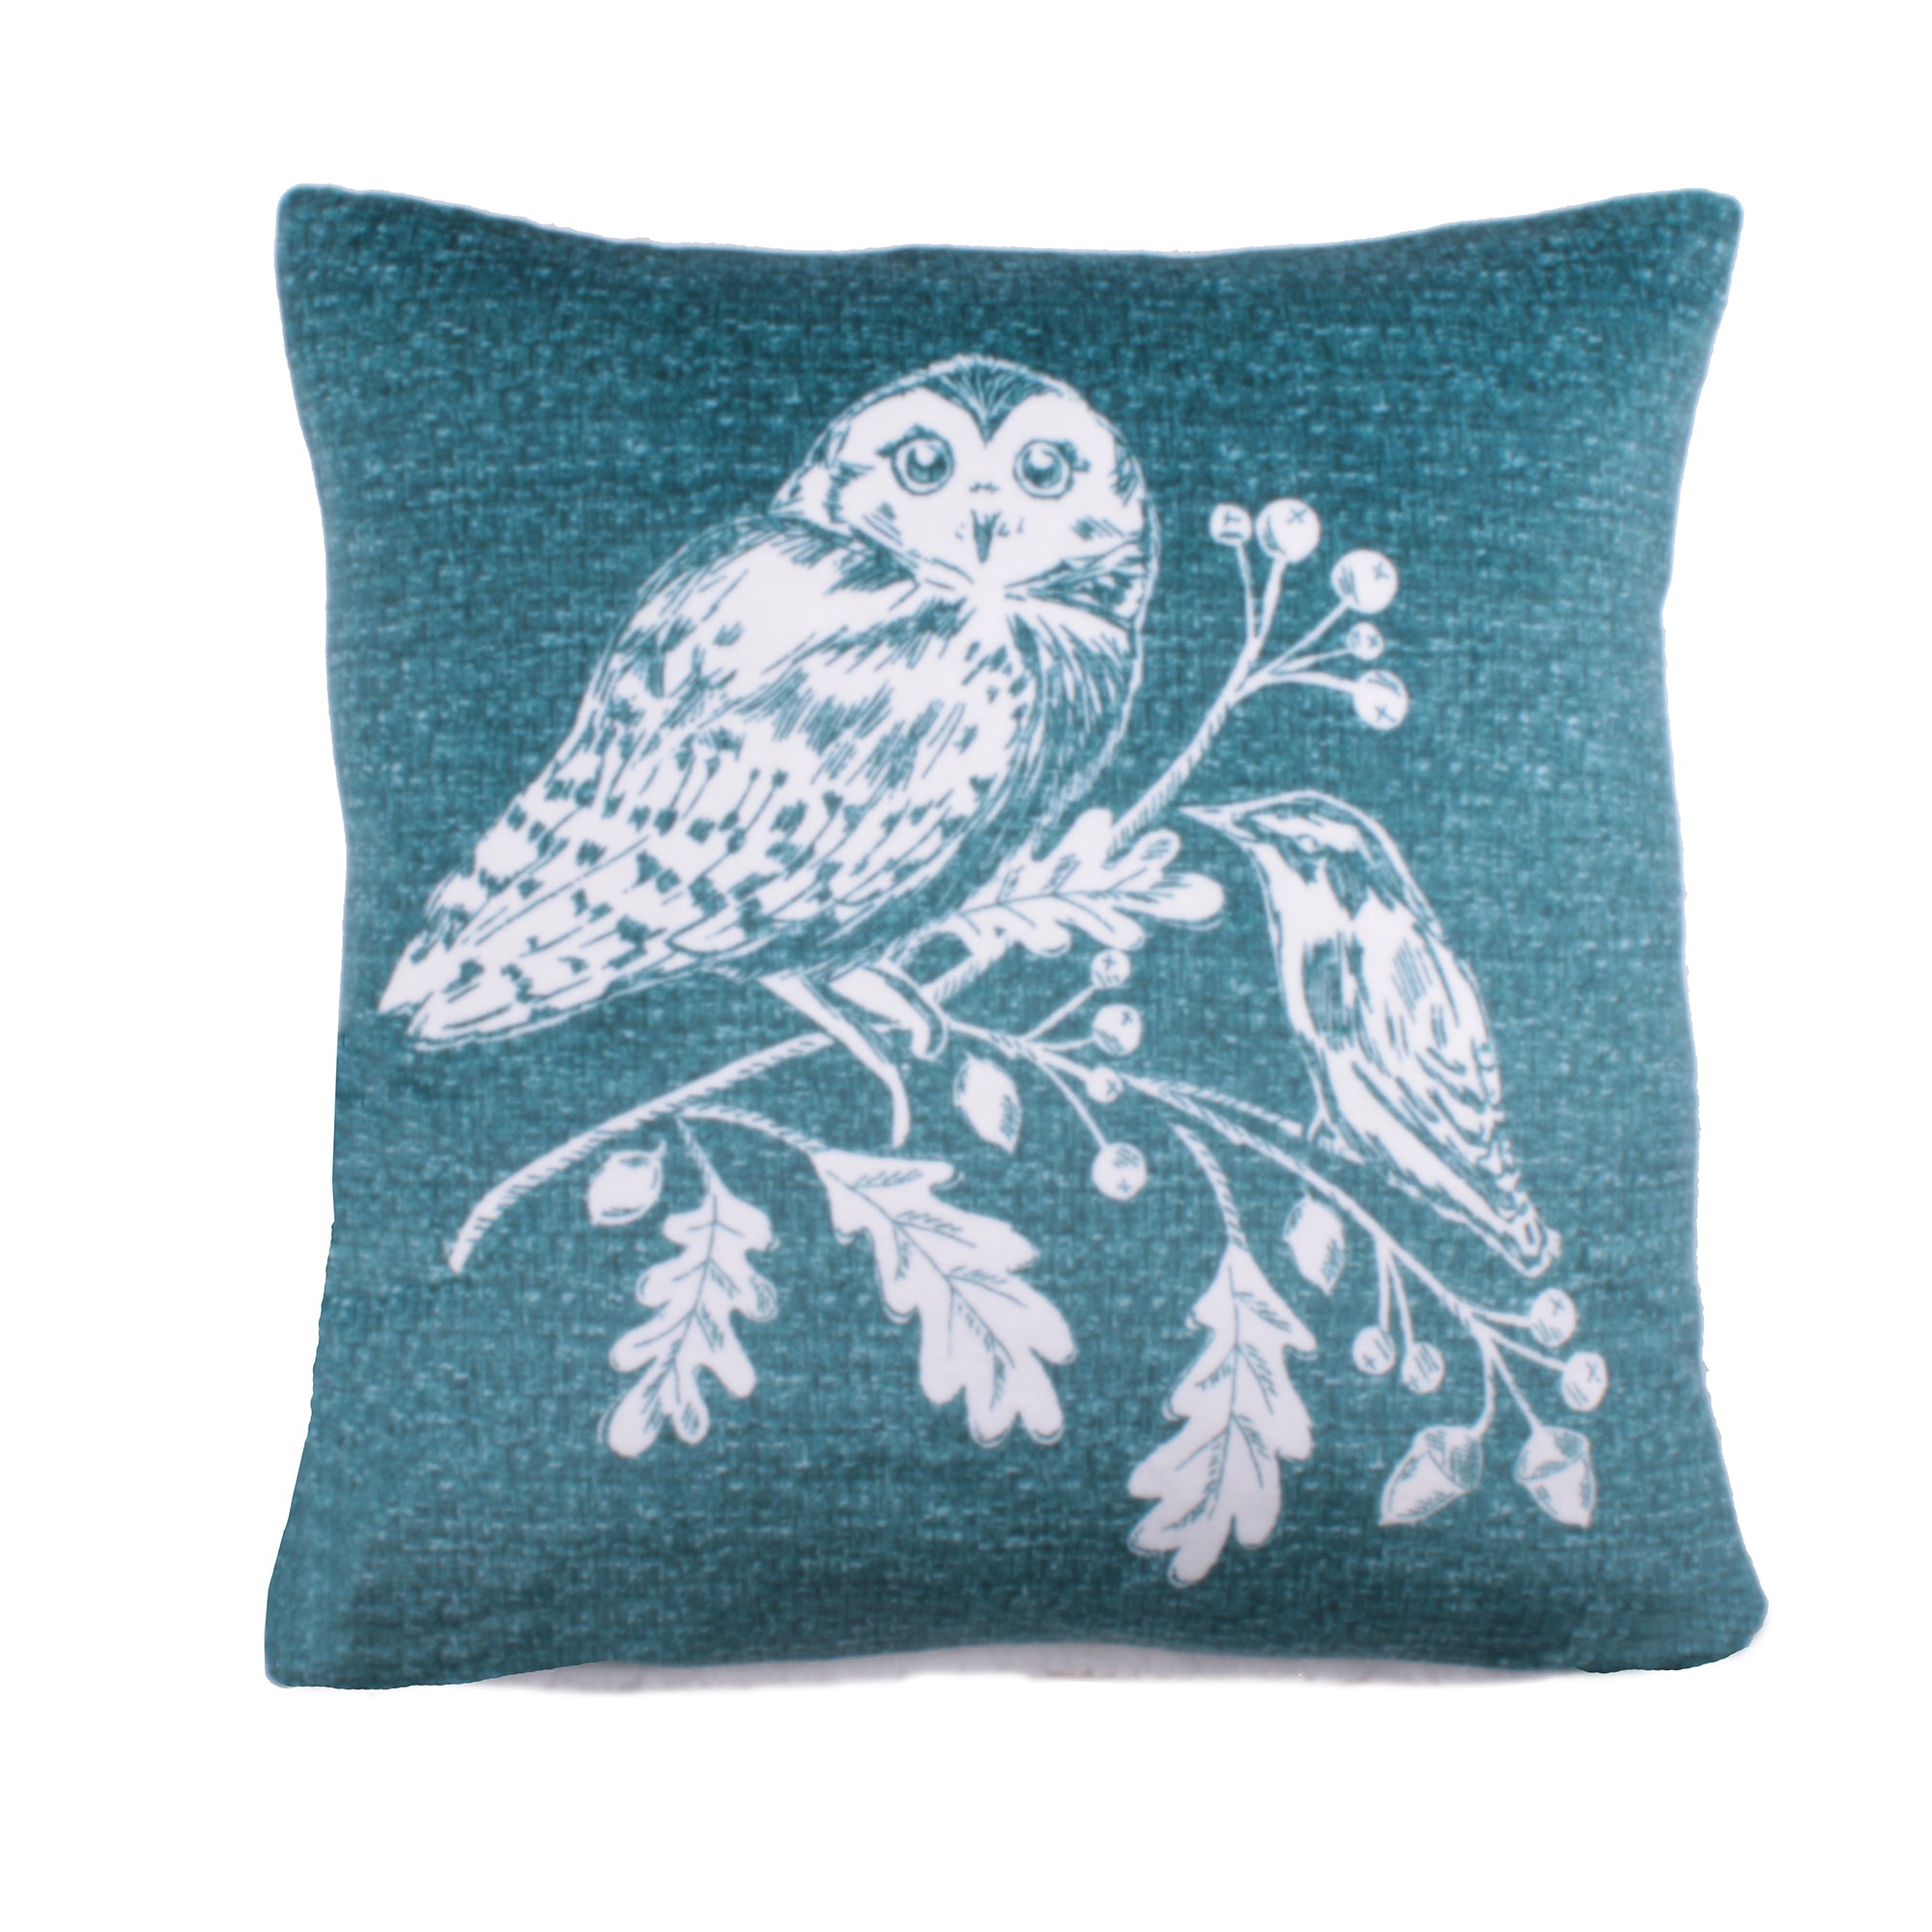 Filled Cushion Woodland Owls by D&D Lodge in Teal